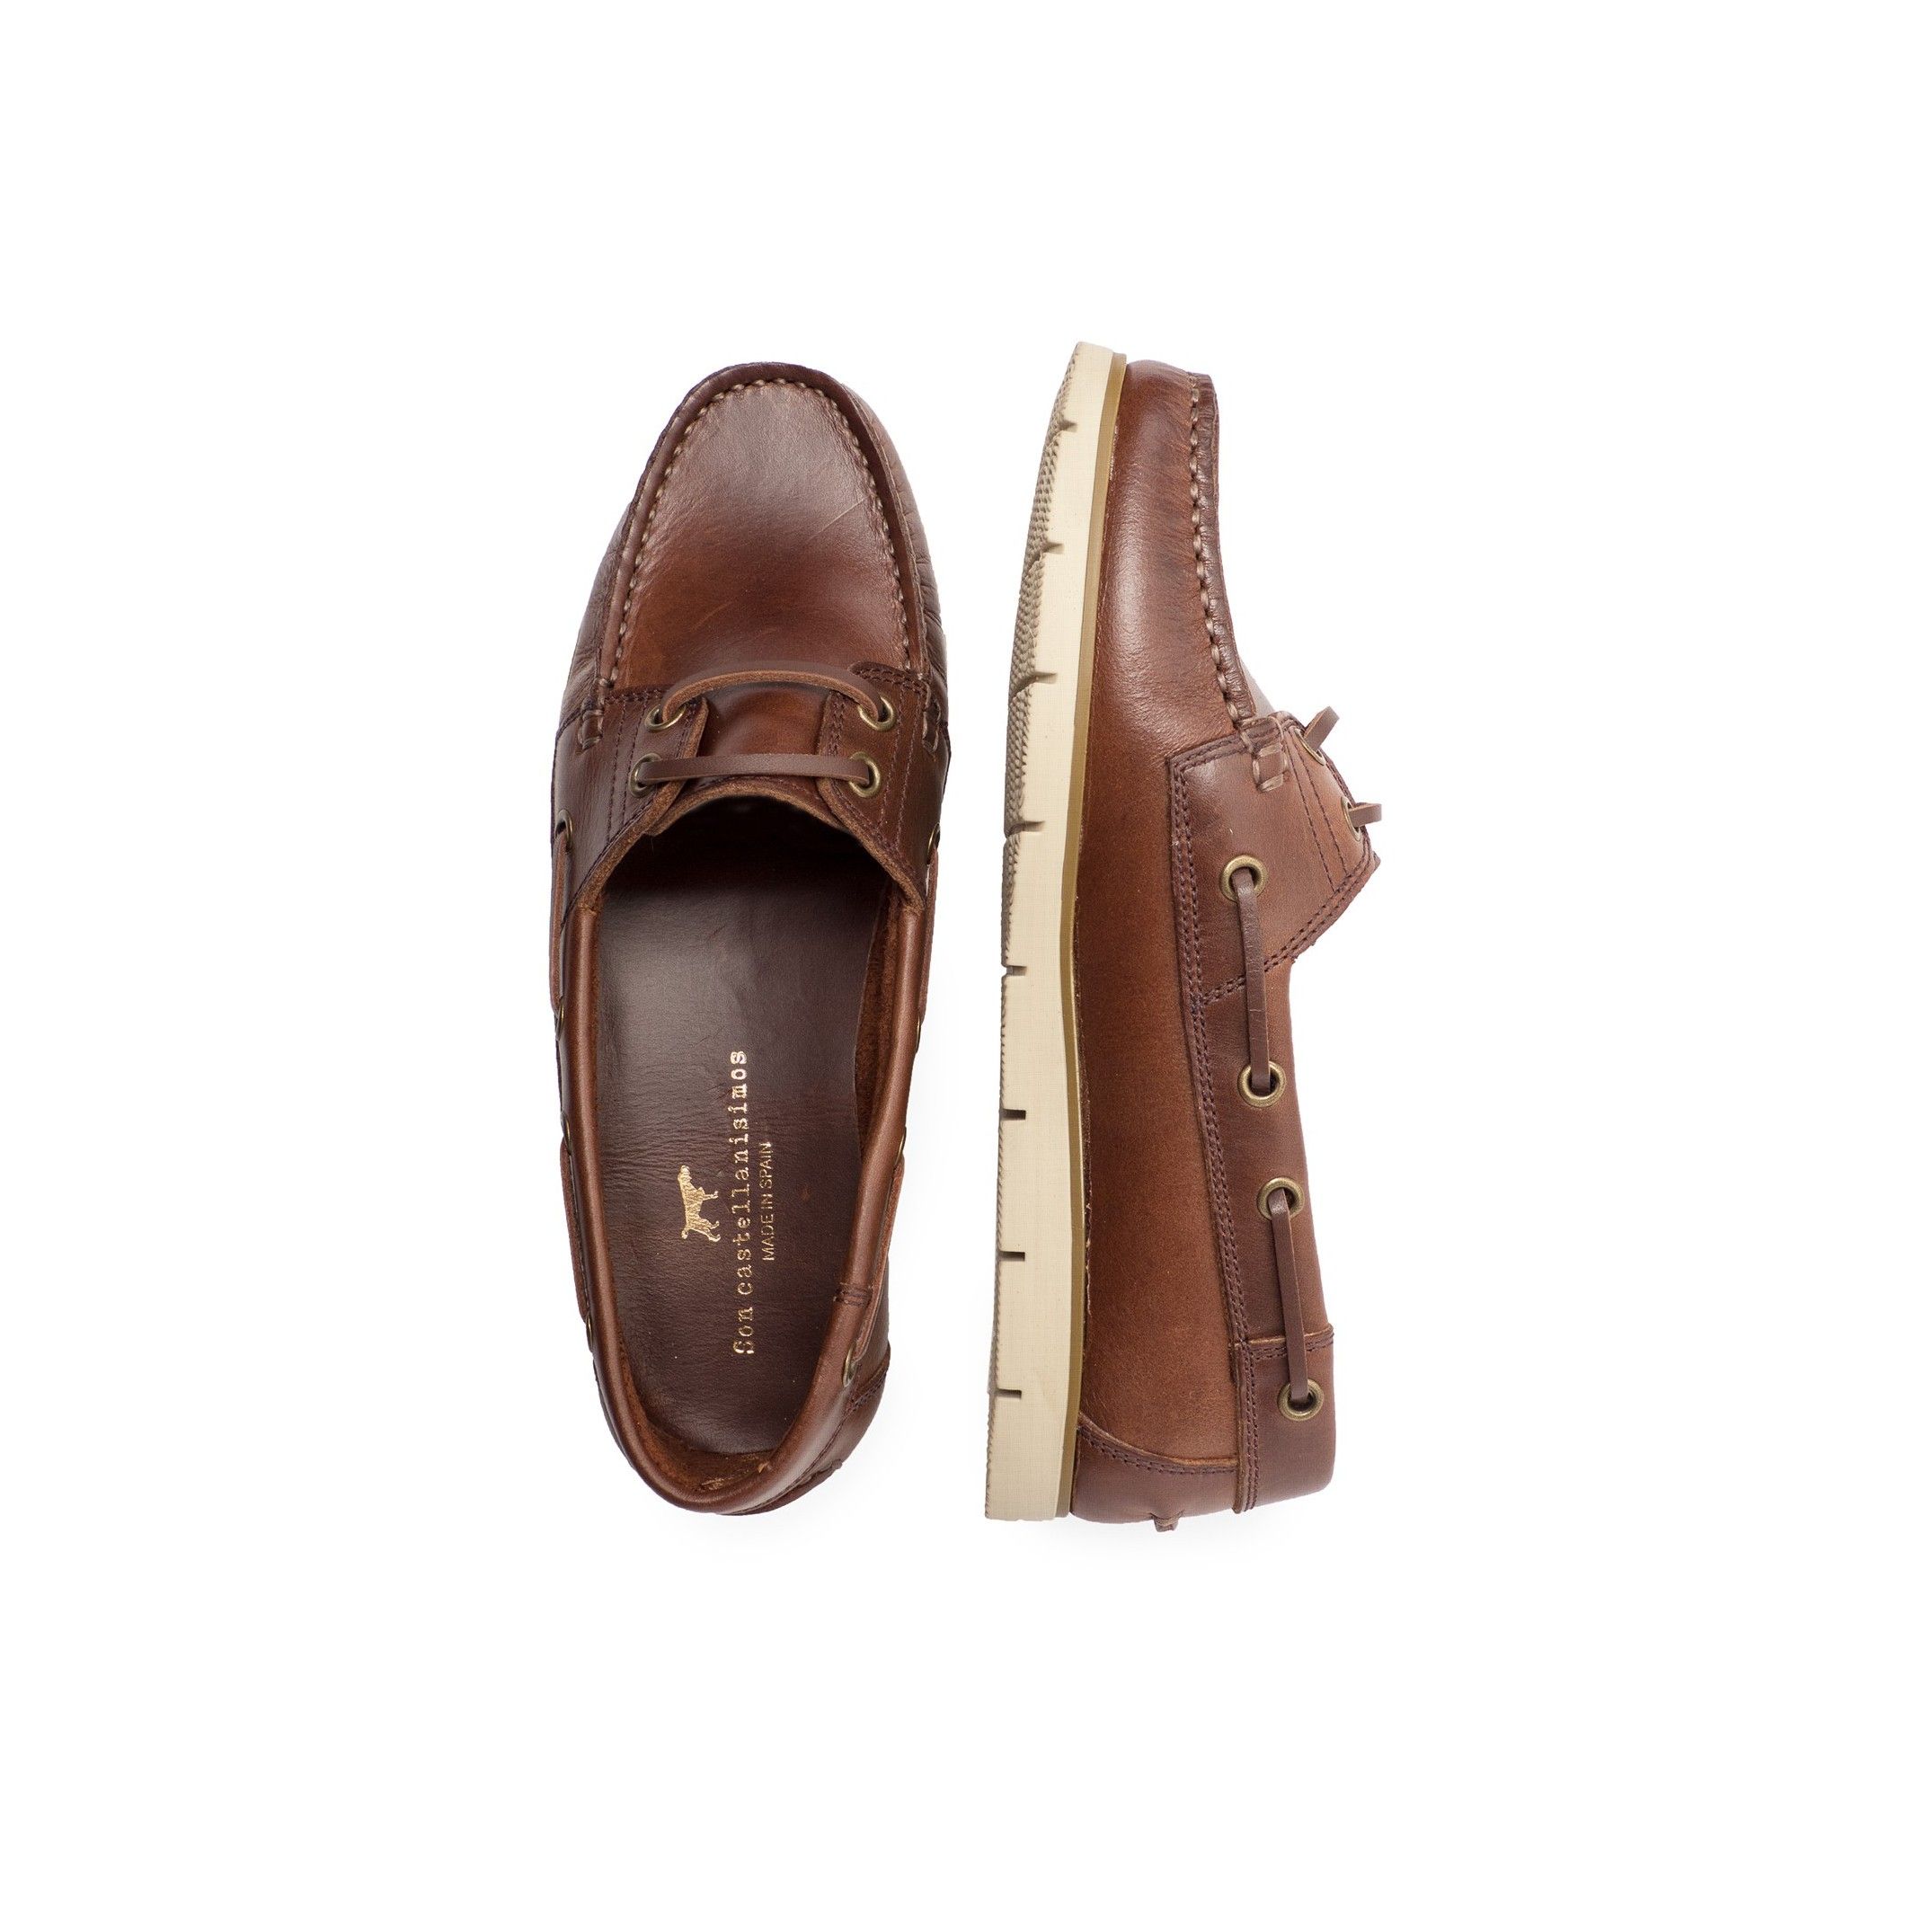 Leather boat shoe by Son Castellanisimos. Closure: Laces. Upper: leather. Inner: leather. Insole: leather. Sole: non-slip. Heel: 1,5 cm. Made in Spain.